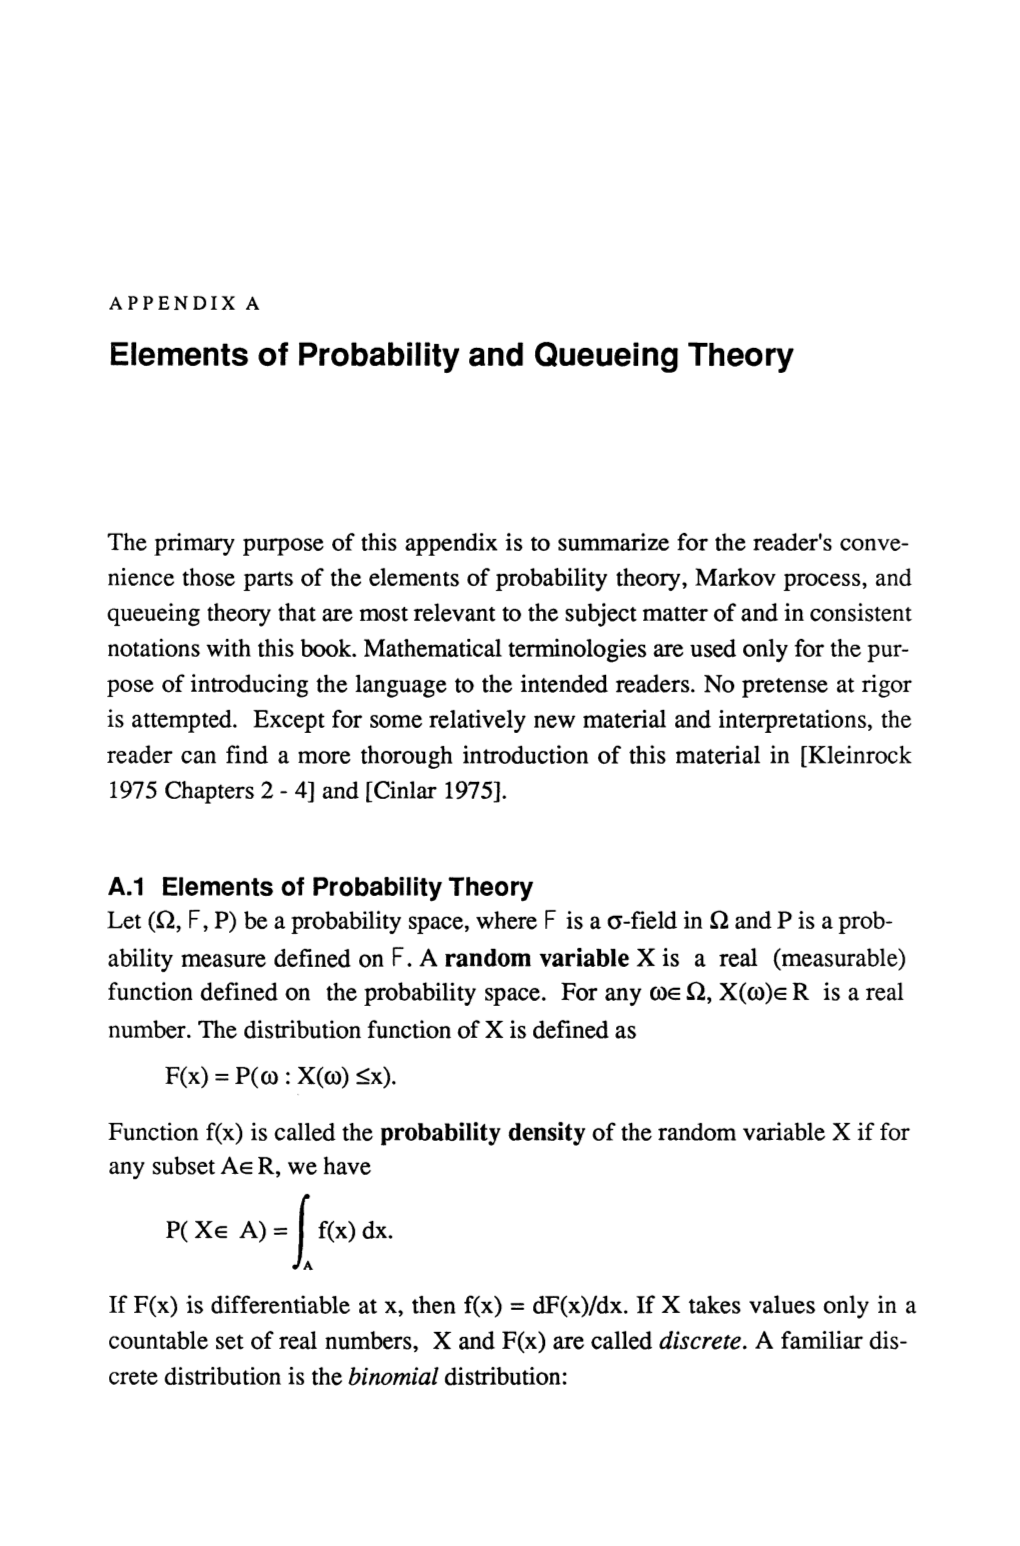 Elements of Probability and Queueing Theory